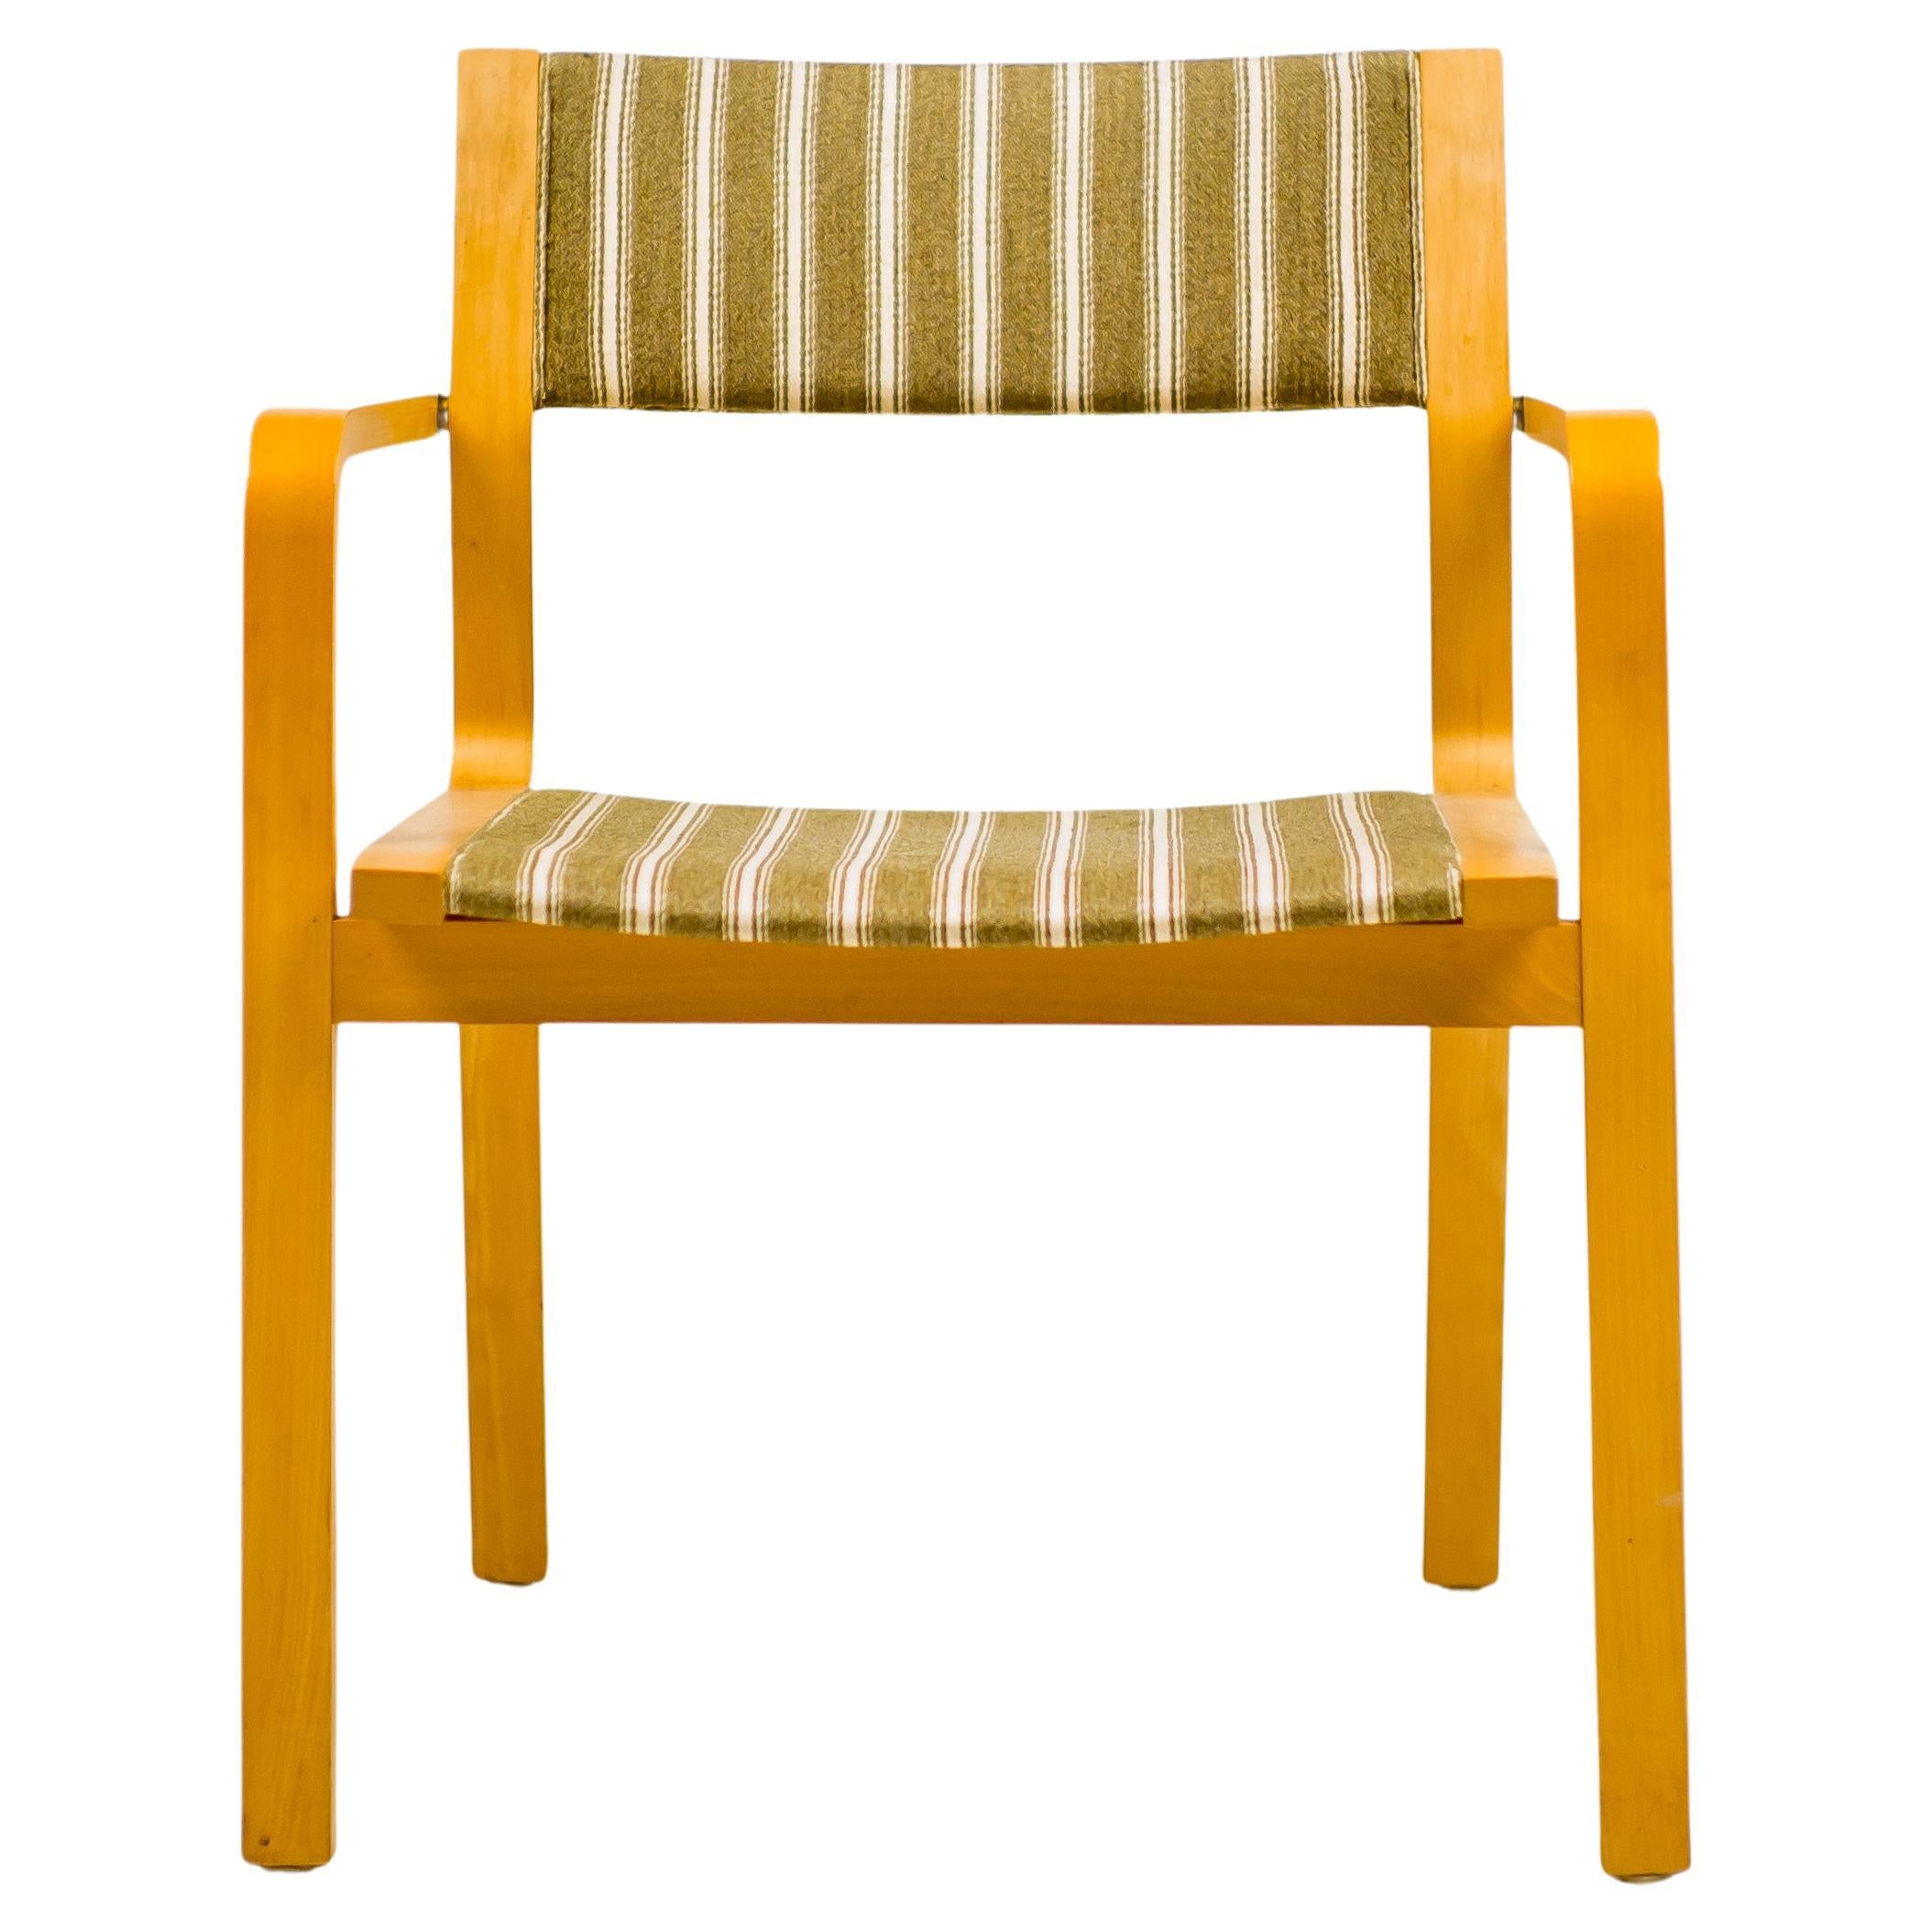 Rare Saint Catherine College Chairs by Arne Jacobsen for Fritz Hansen